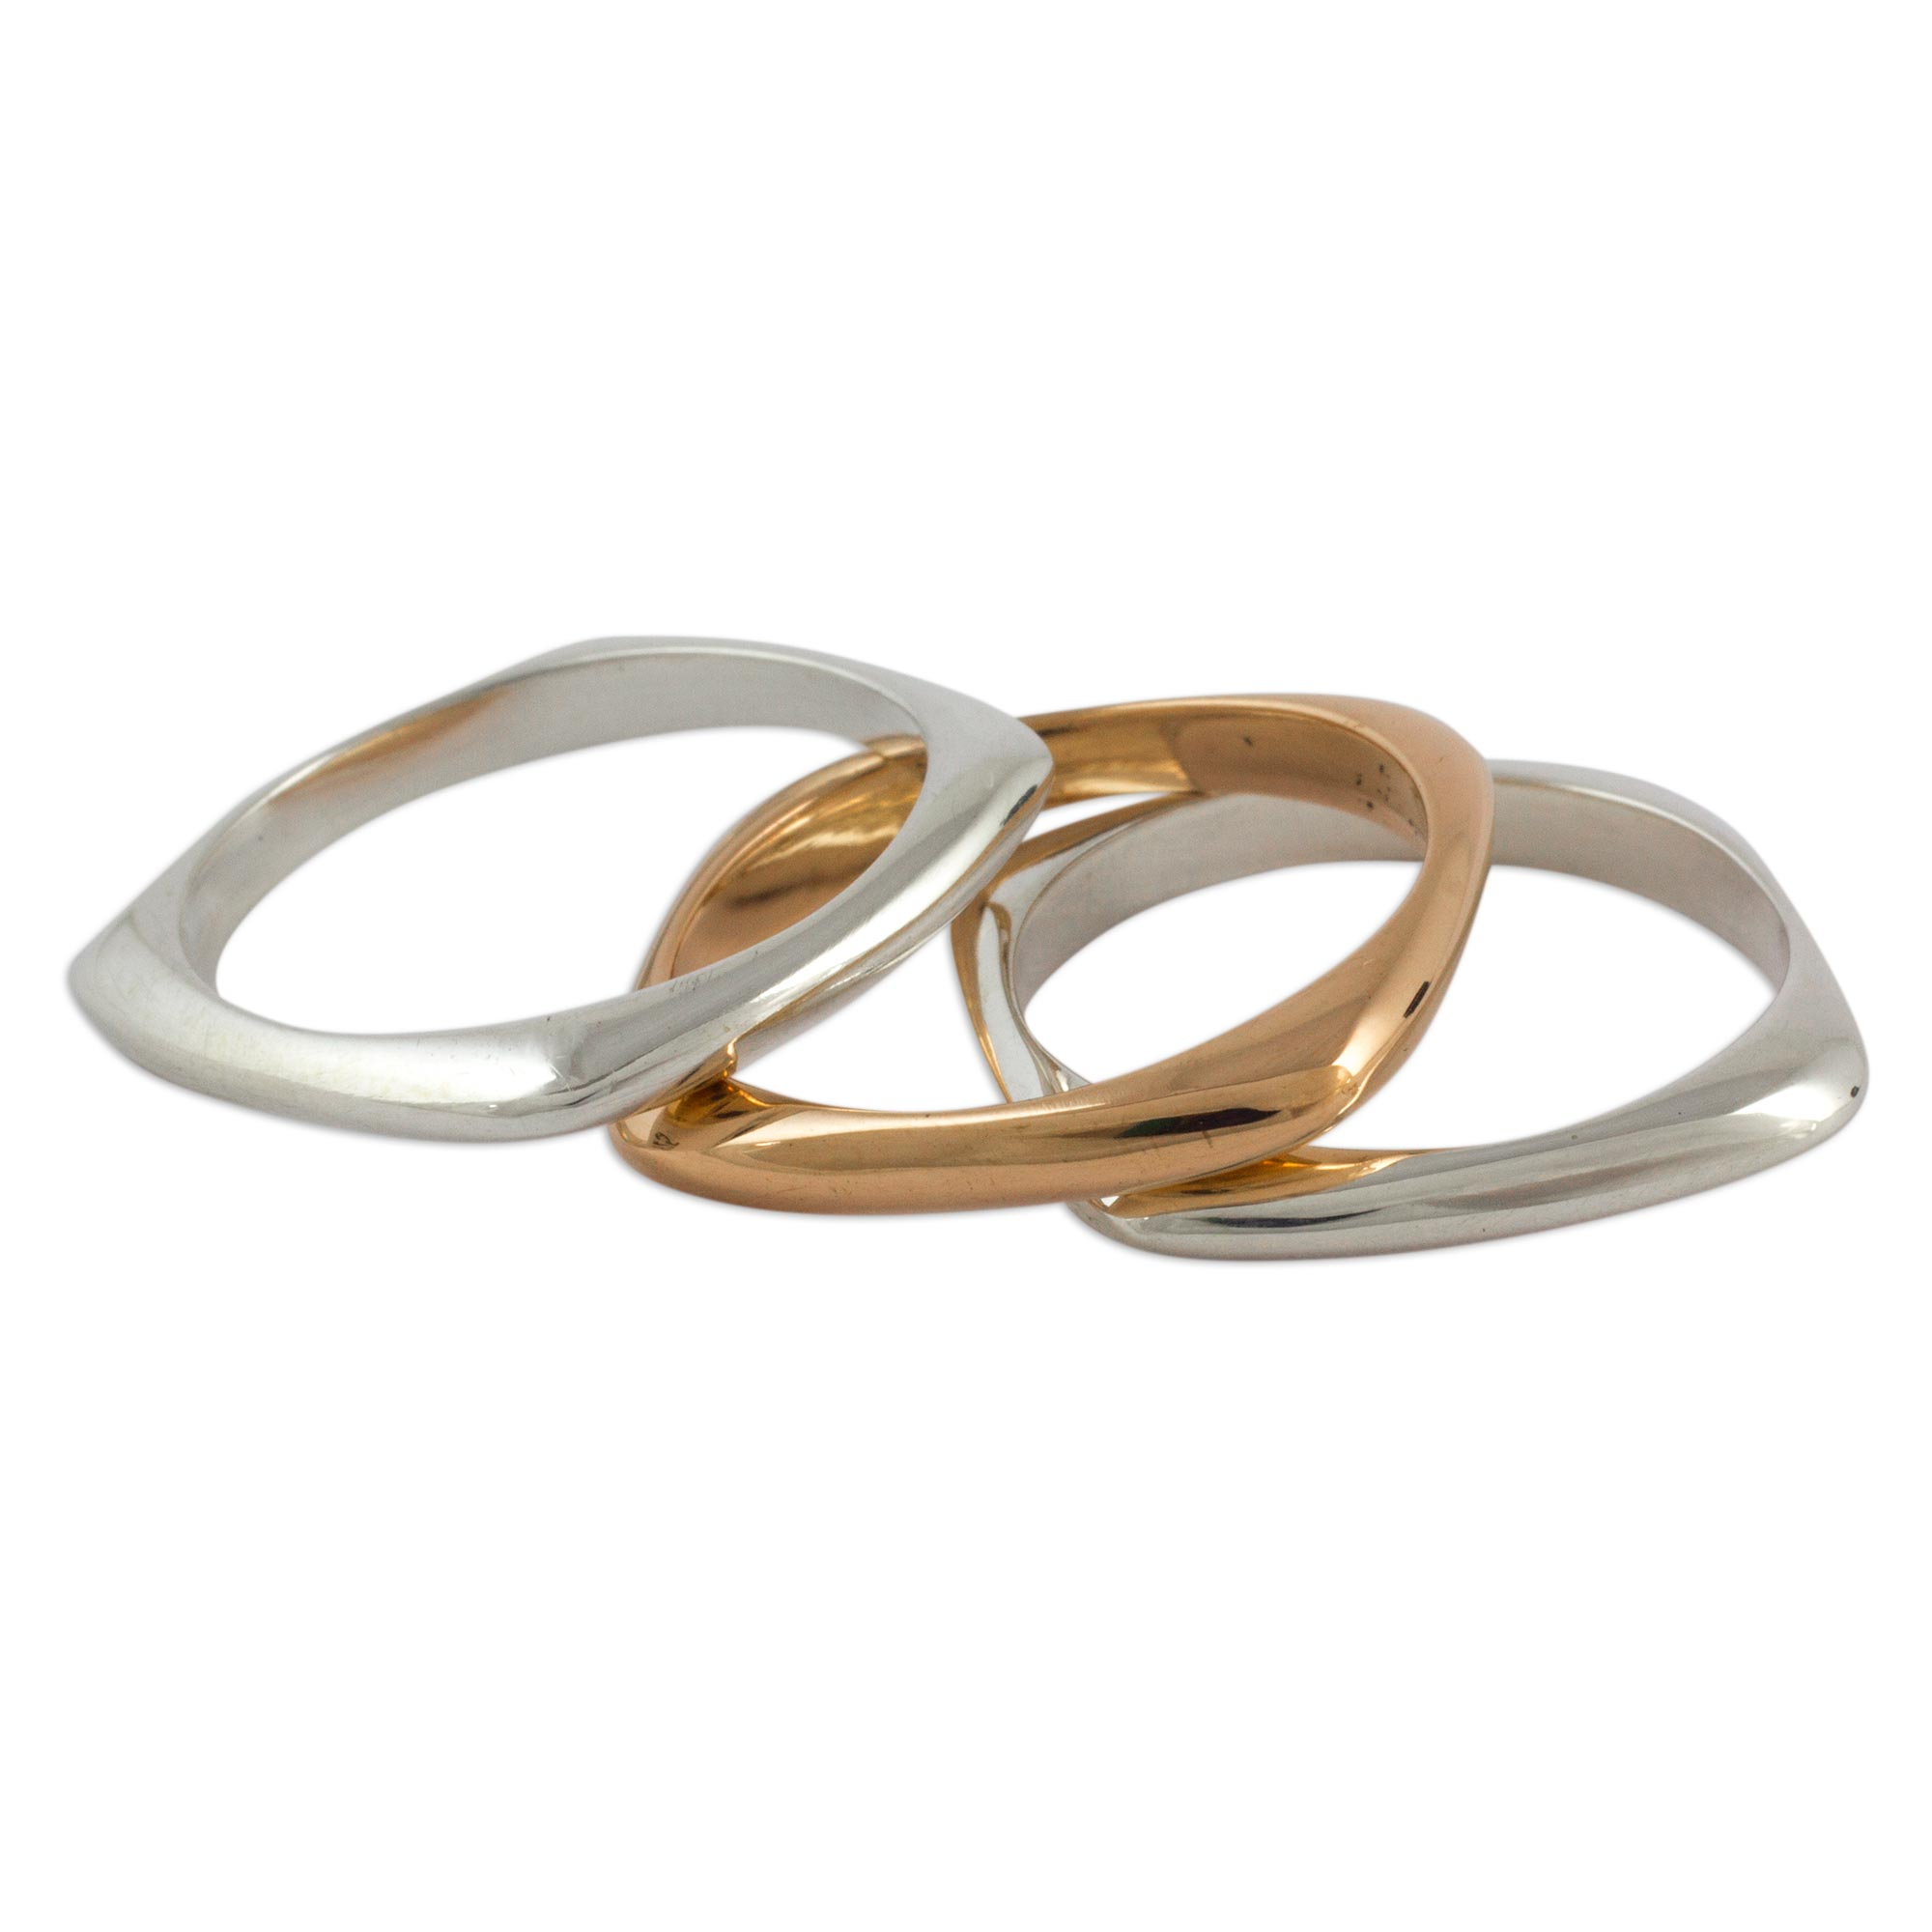 Handcrafted Copper Sterling Silver Stacking Rings (Set of 3) - Taxco ...